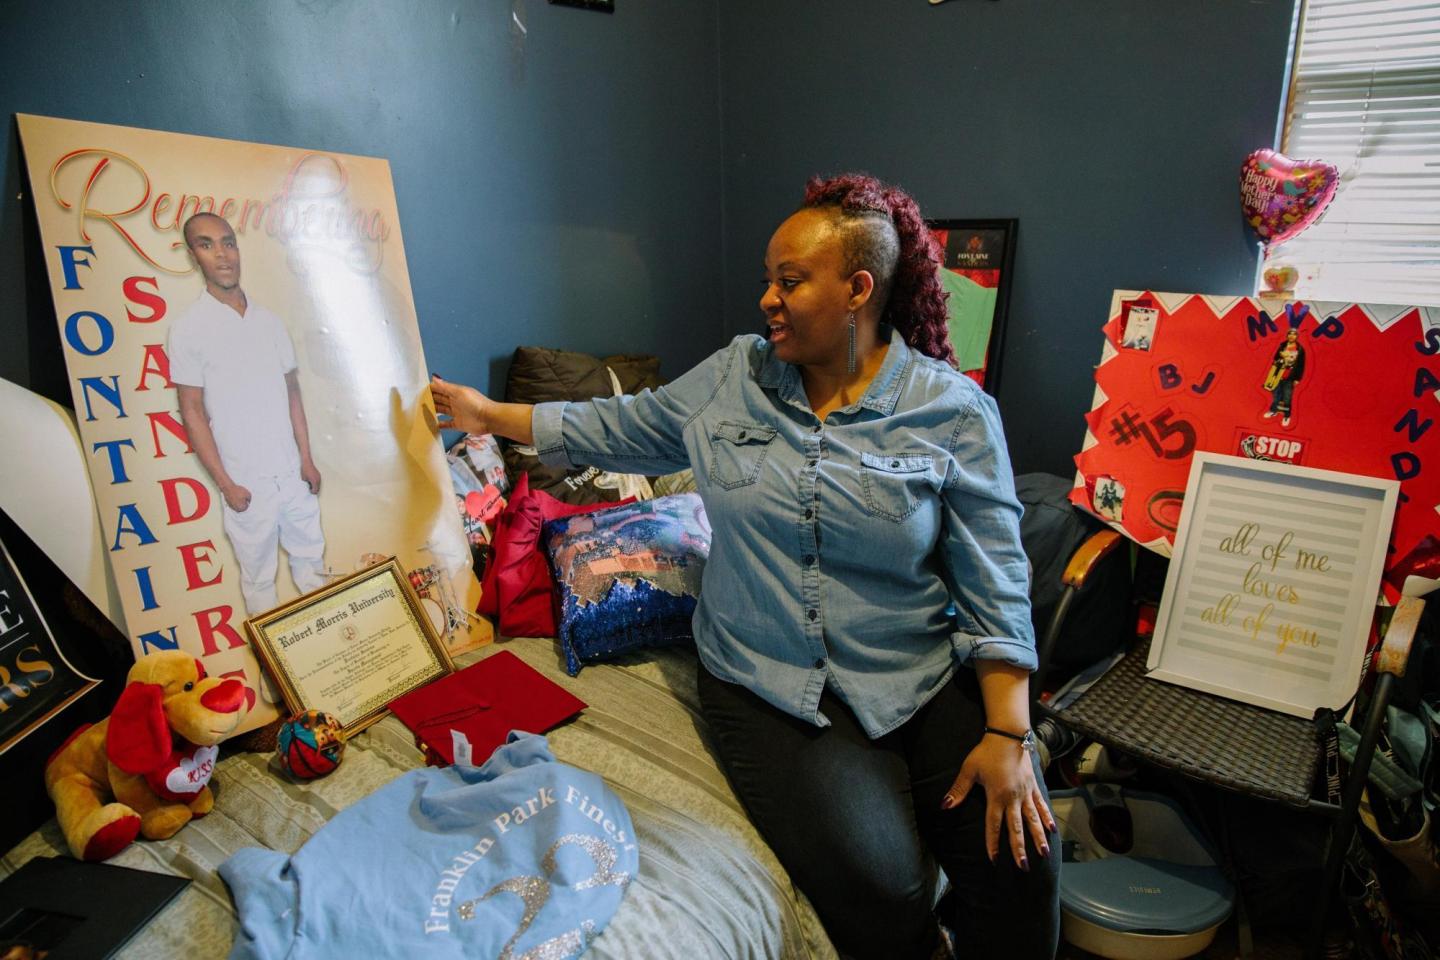 A woman sits on a twin bed and touches a poster picturing a young adult.